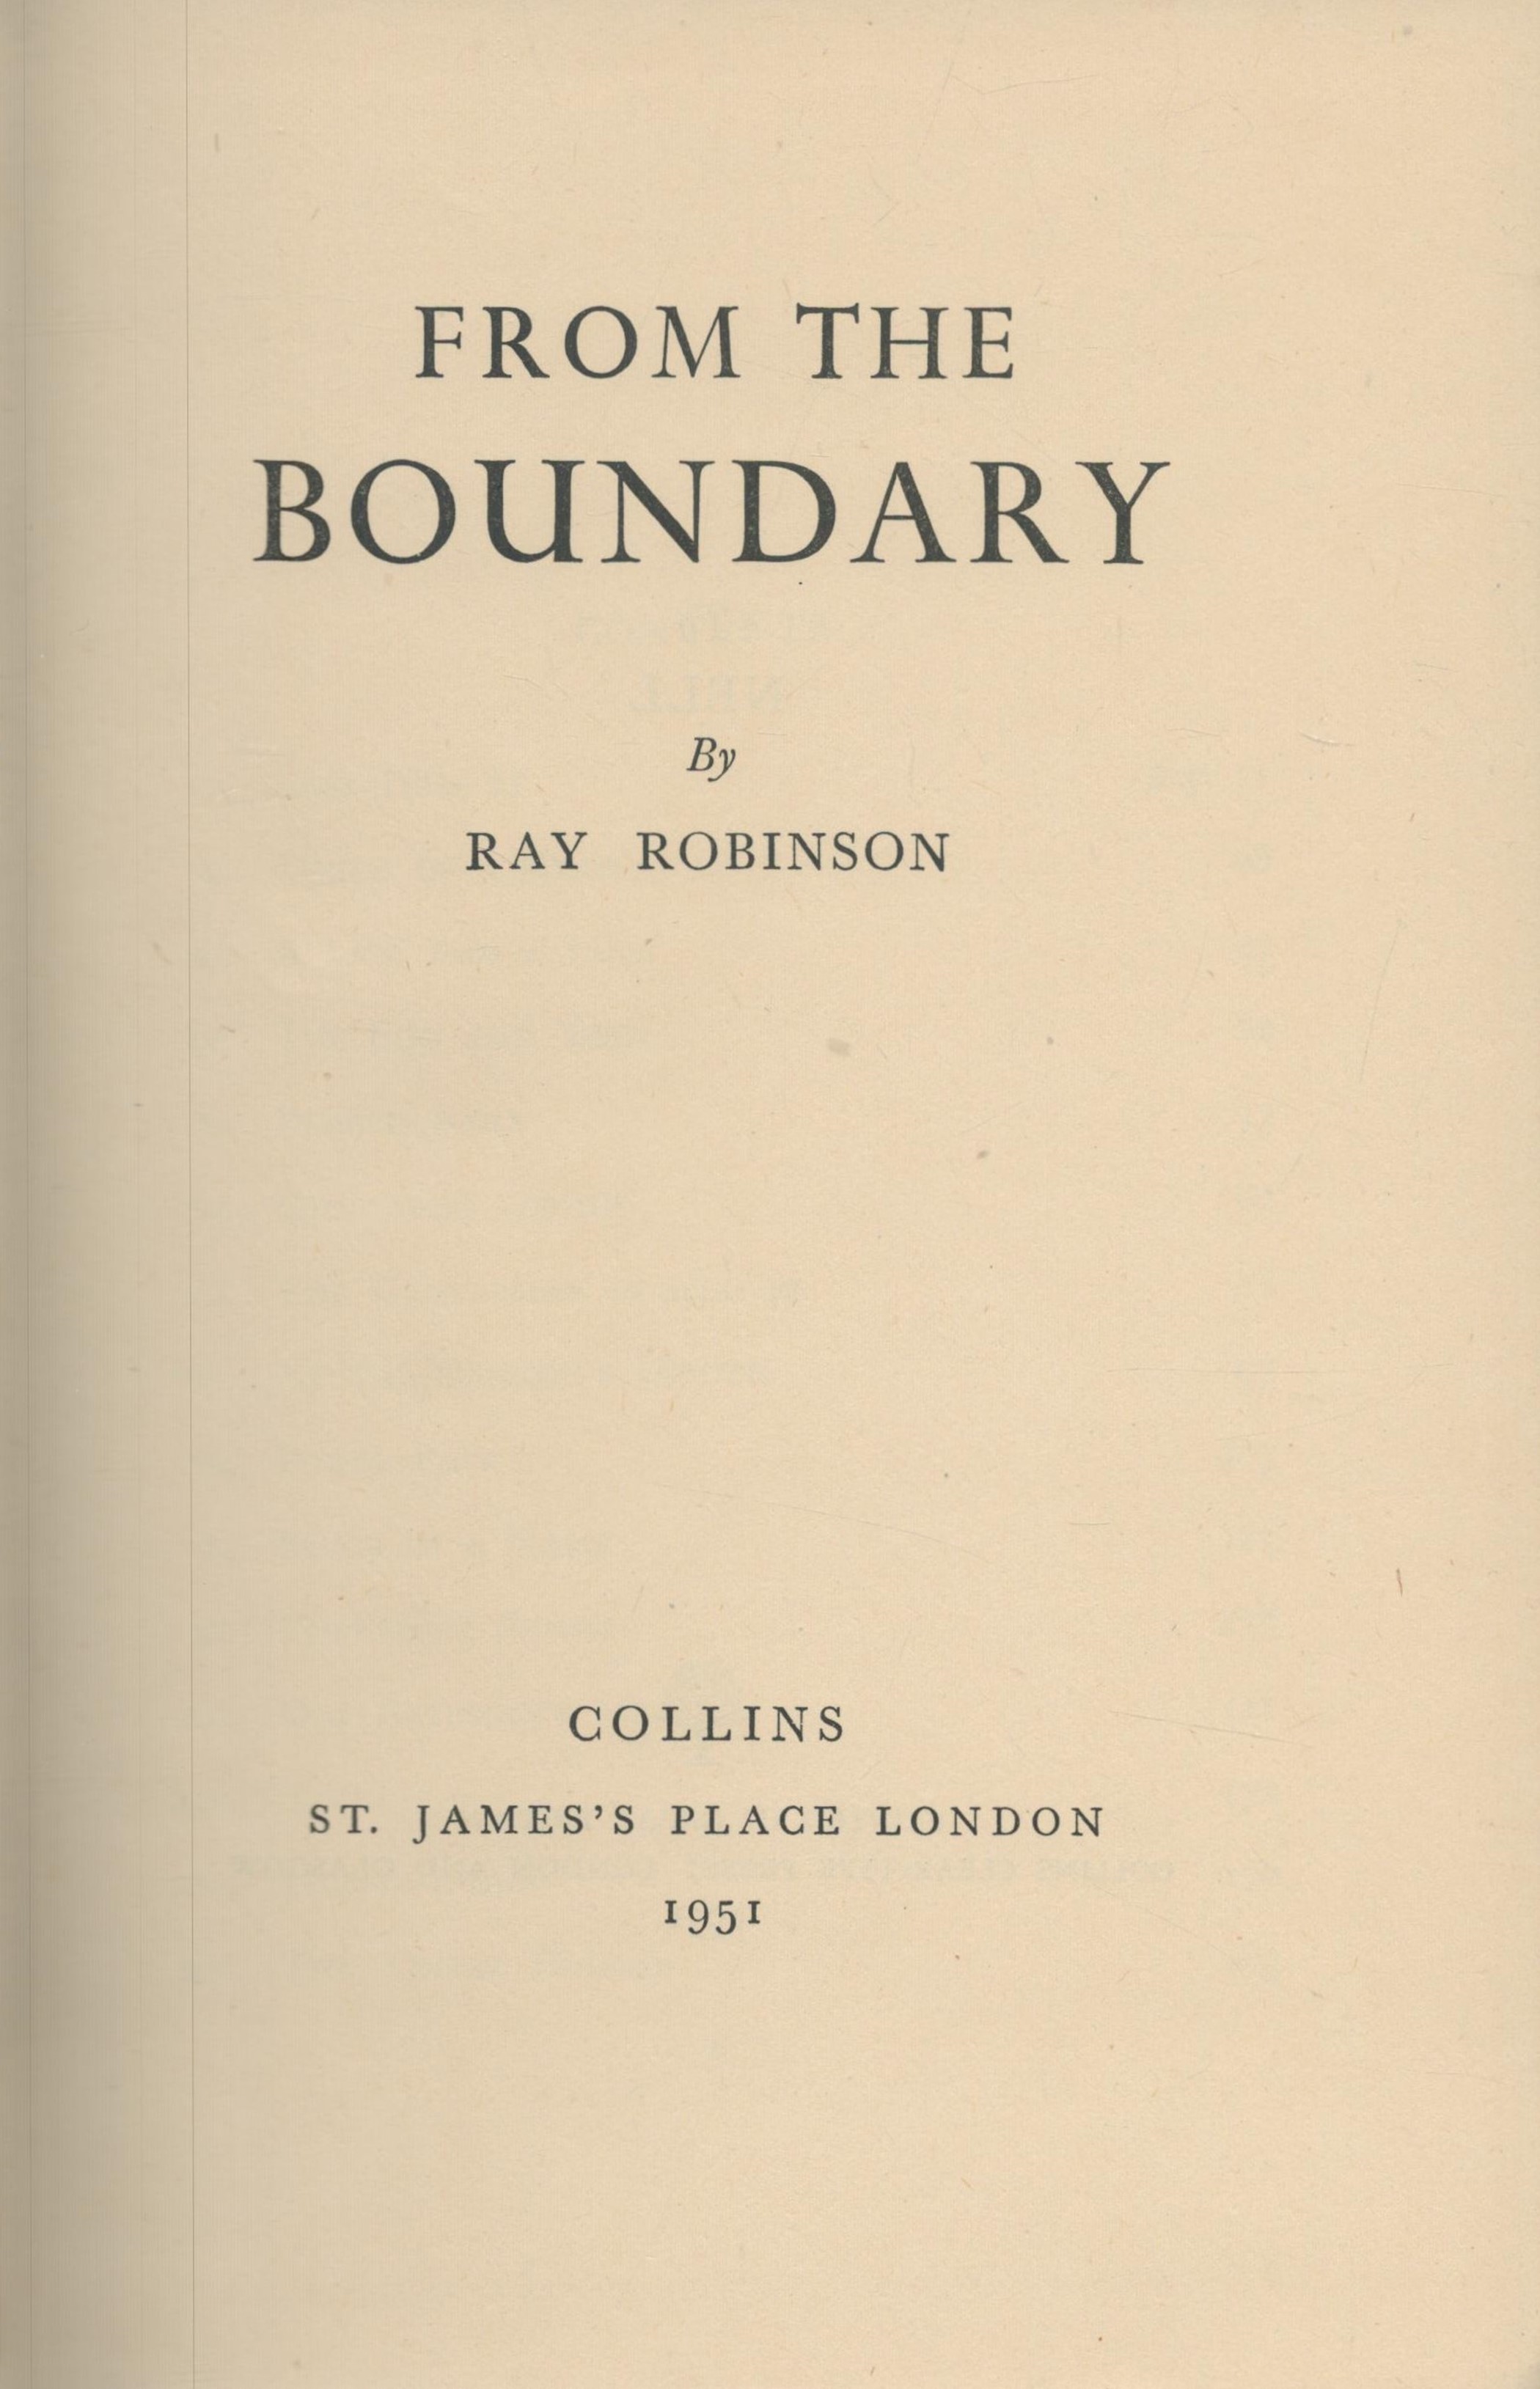 From the Boundary by Ray Robinson hardback book. Few knocks to dustjacket. UNSIGNED. Good - Image 2 of 3